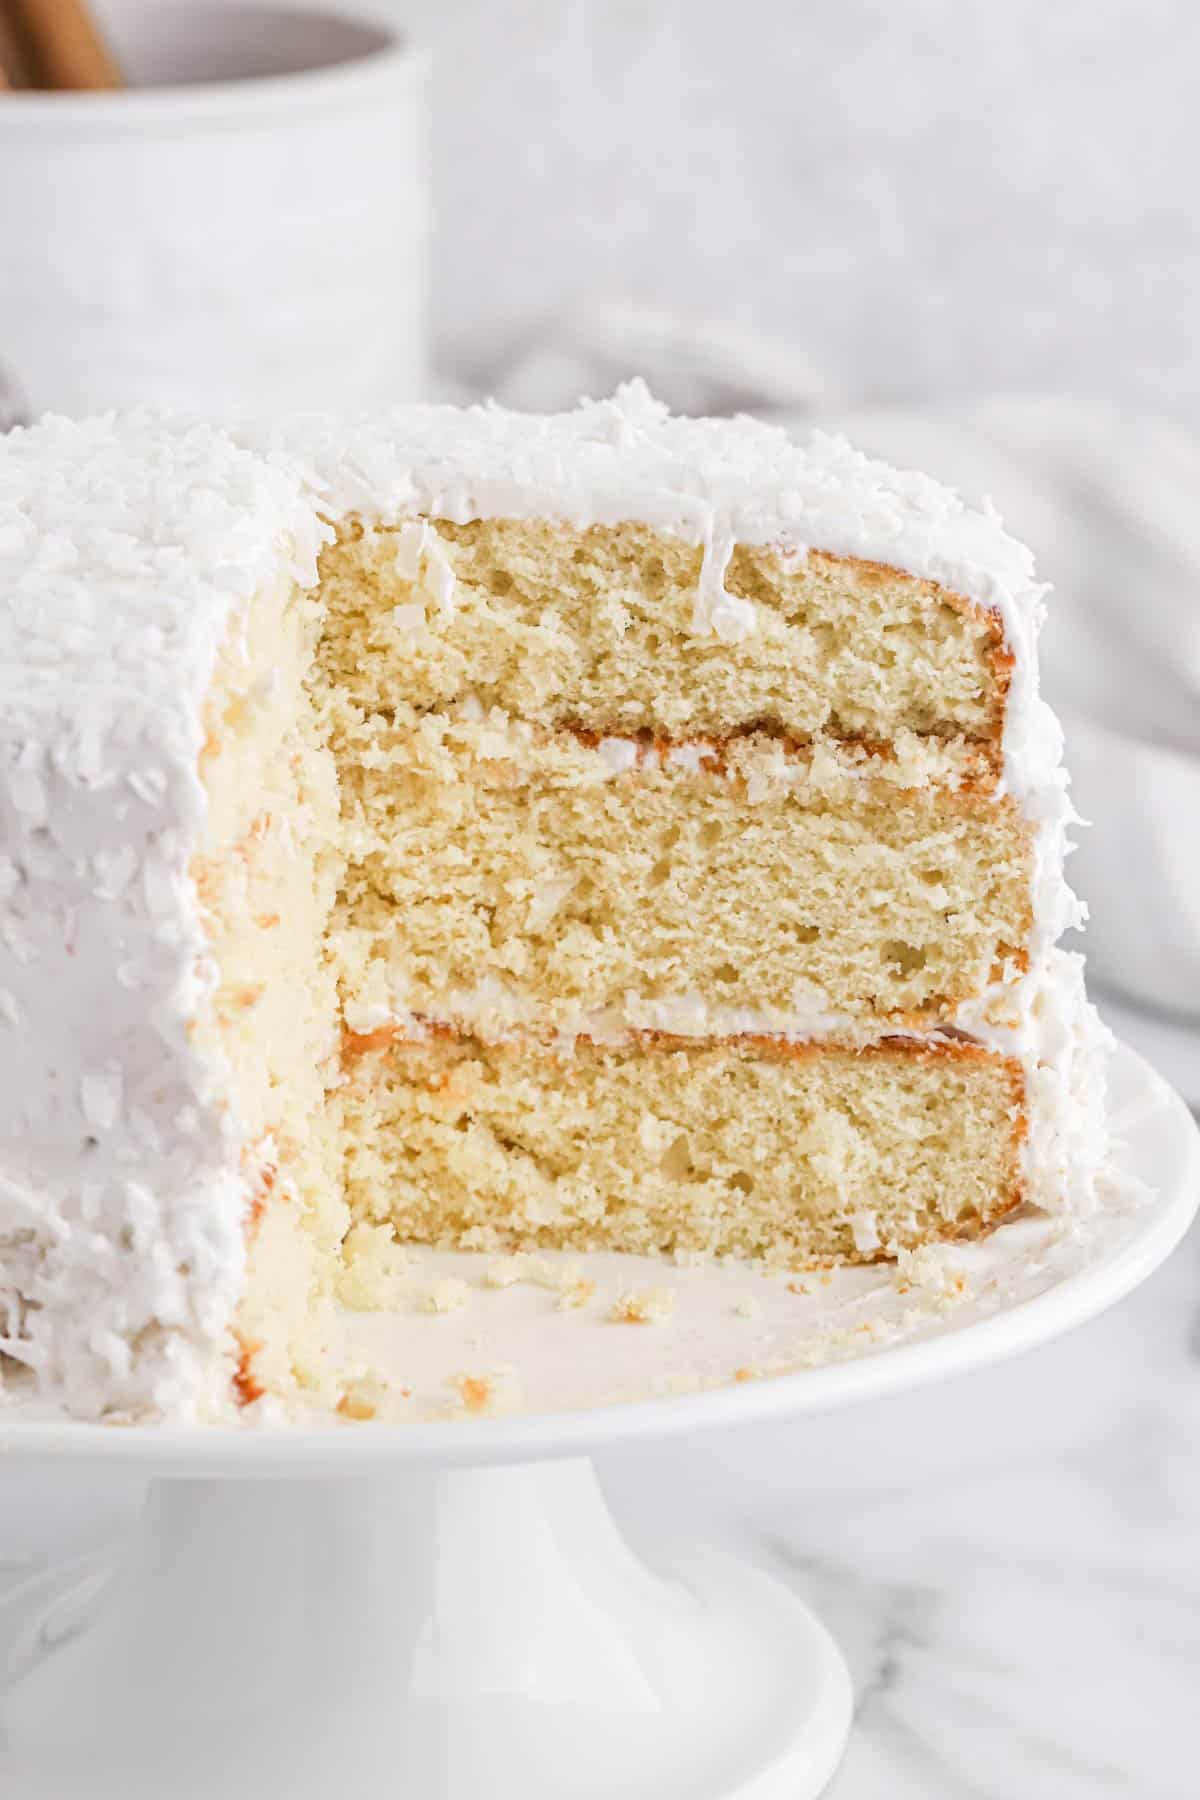 Easy coconut cake on a cake stand with pieces cut to show the inside layers.